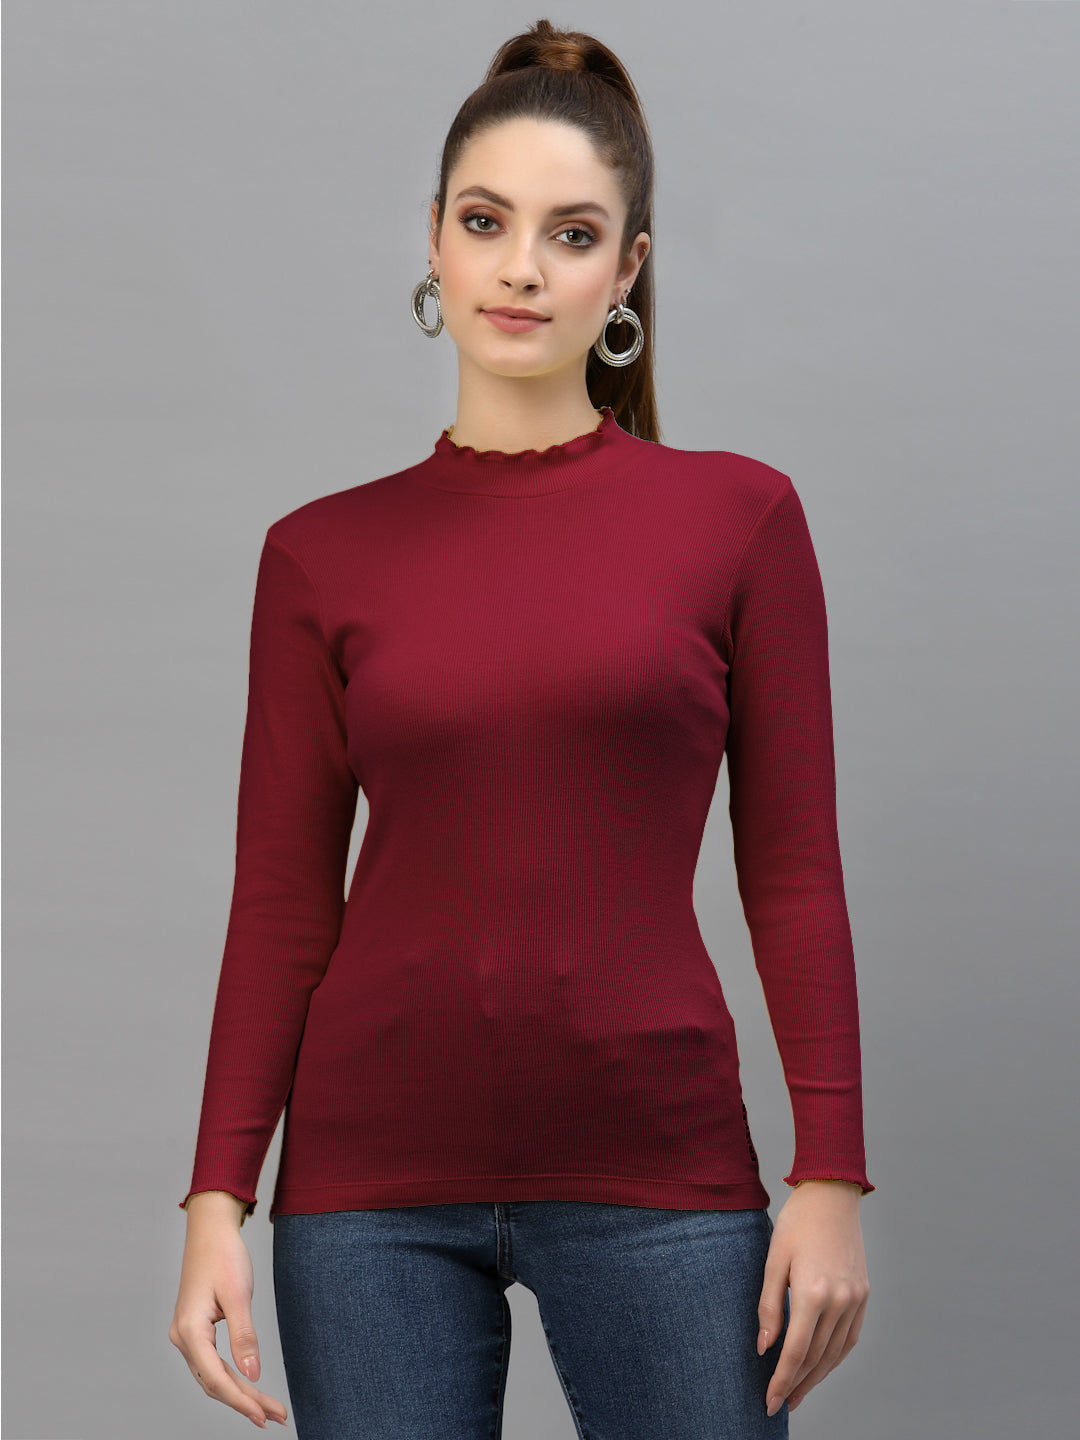 Women Solid Fitted High Neck Full Sleeve Top - Friskers